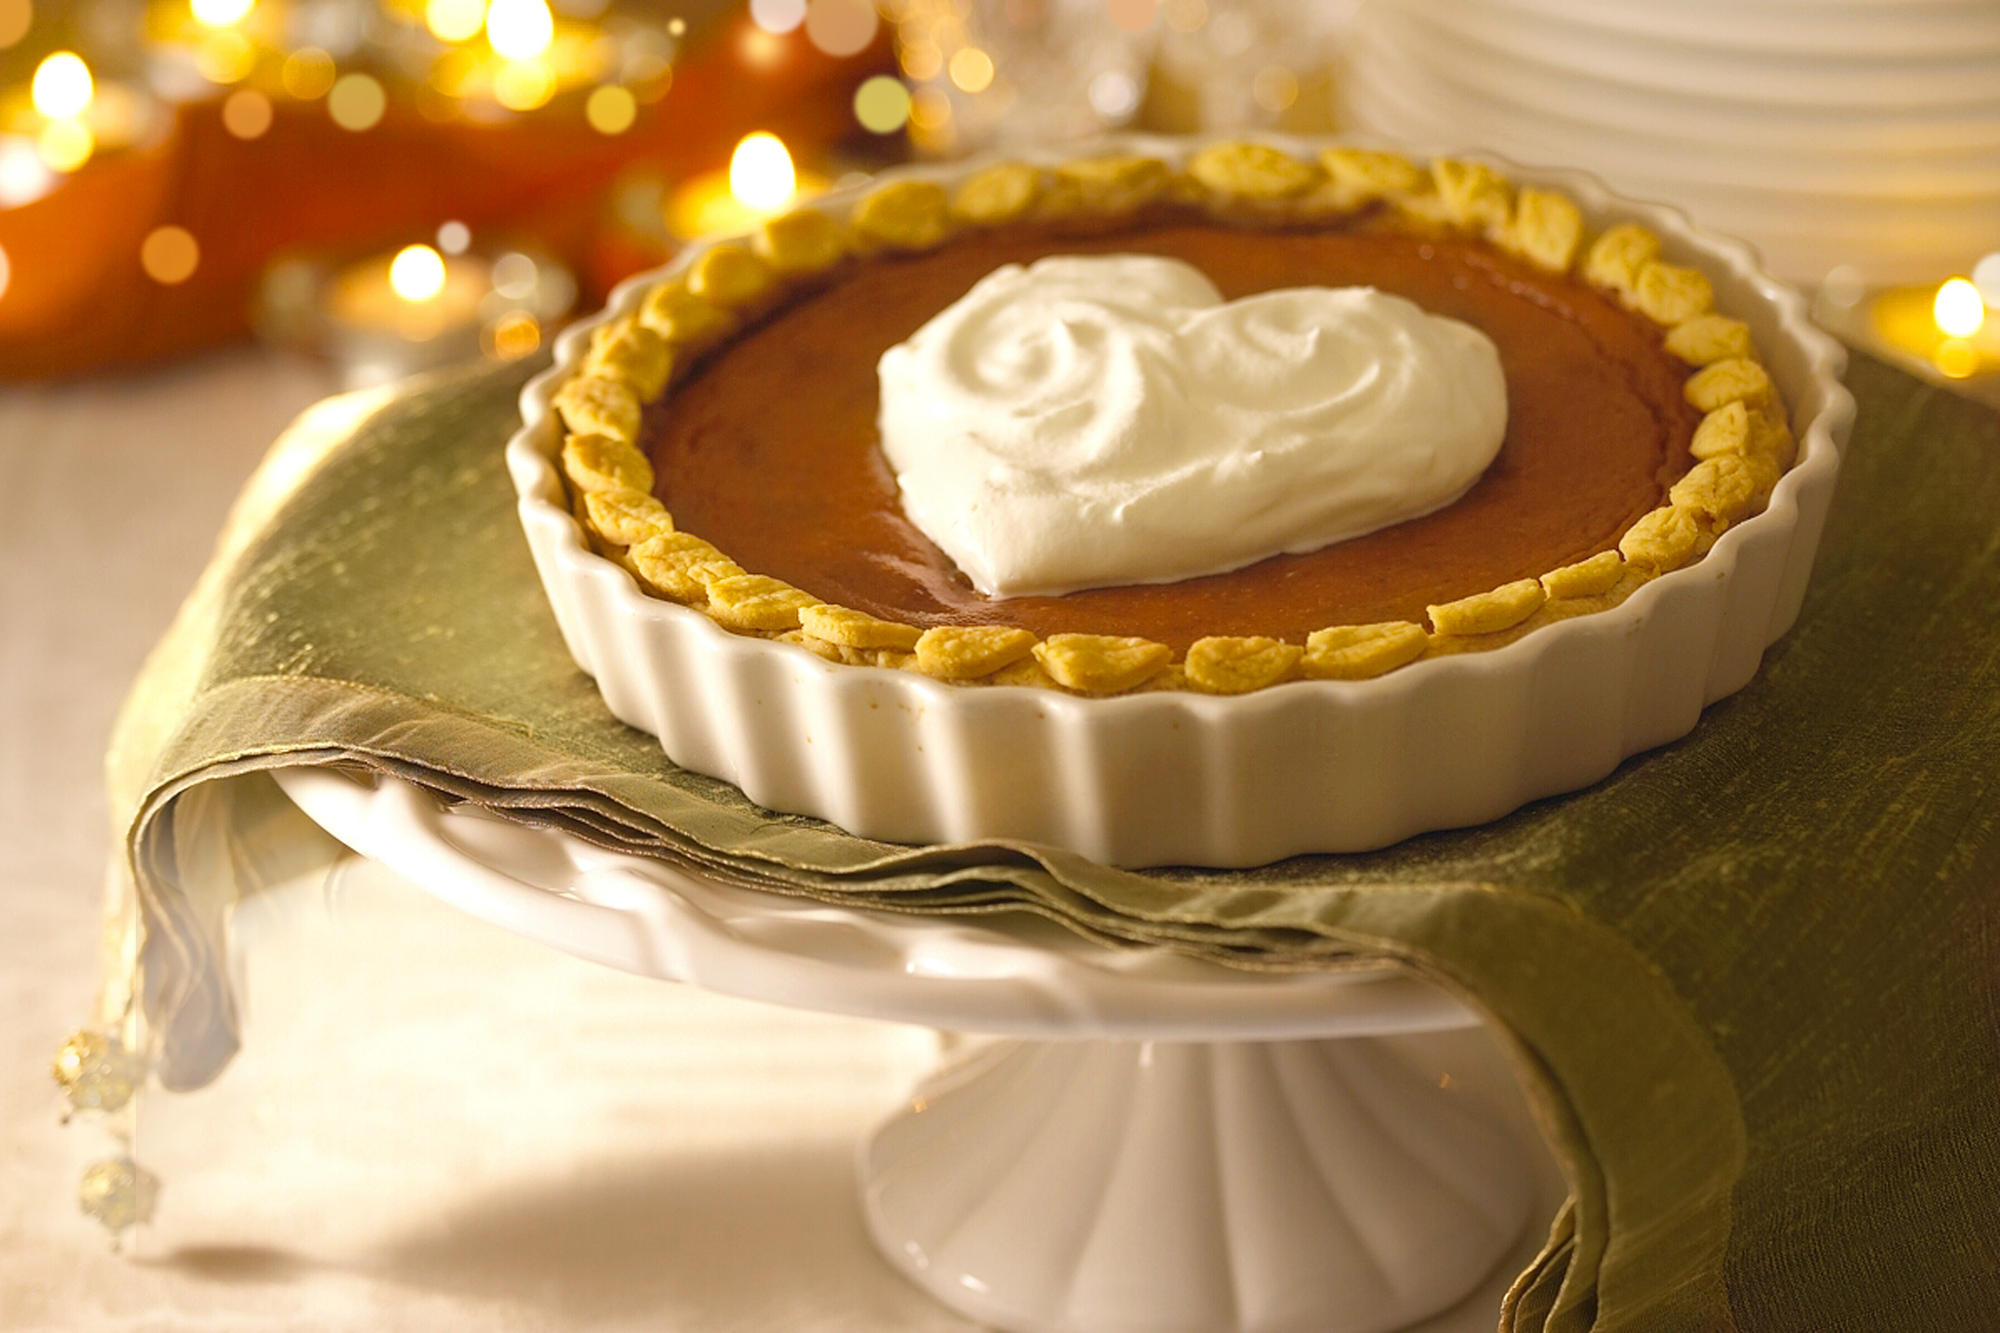 Heart-shaped pumpkin pie, perfect for autumn cravings.